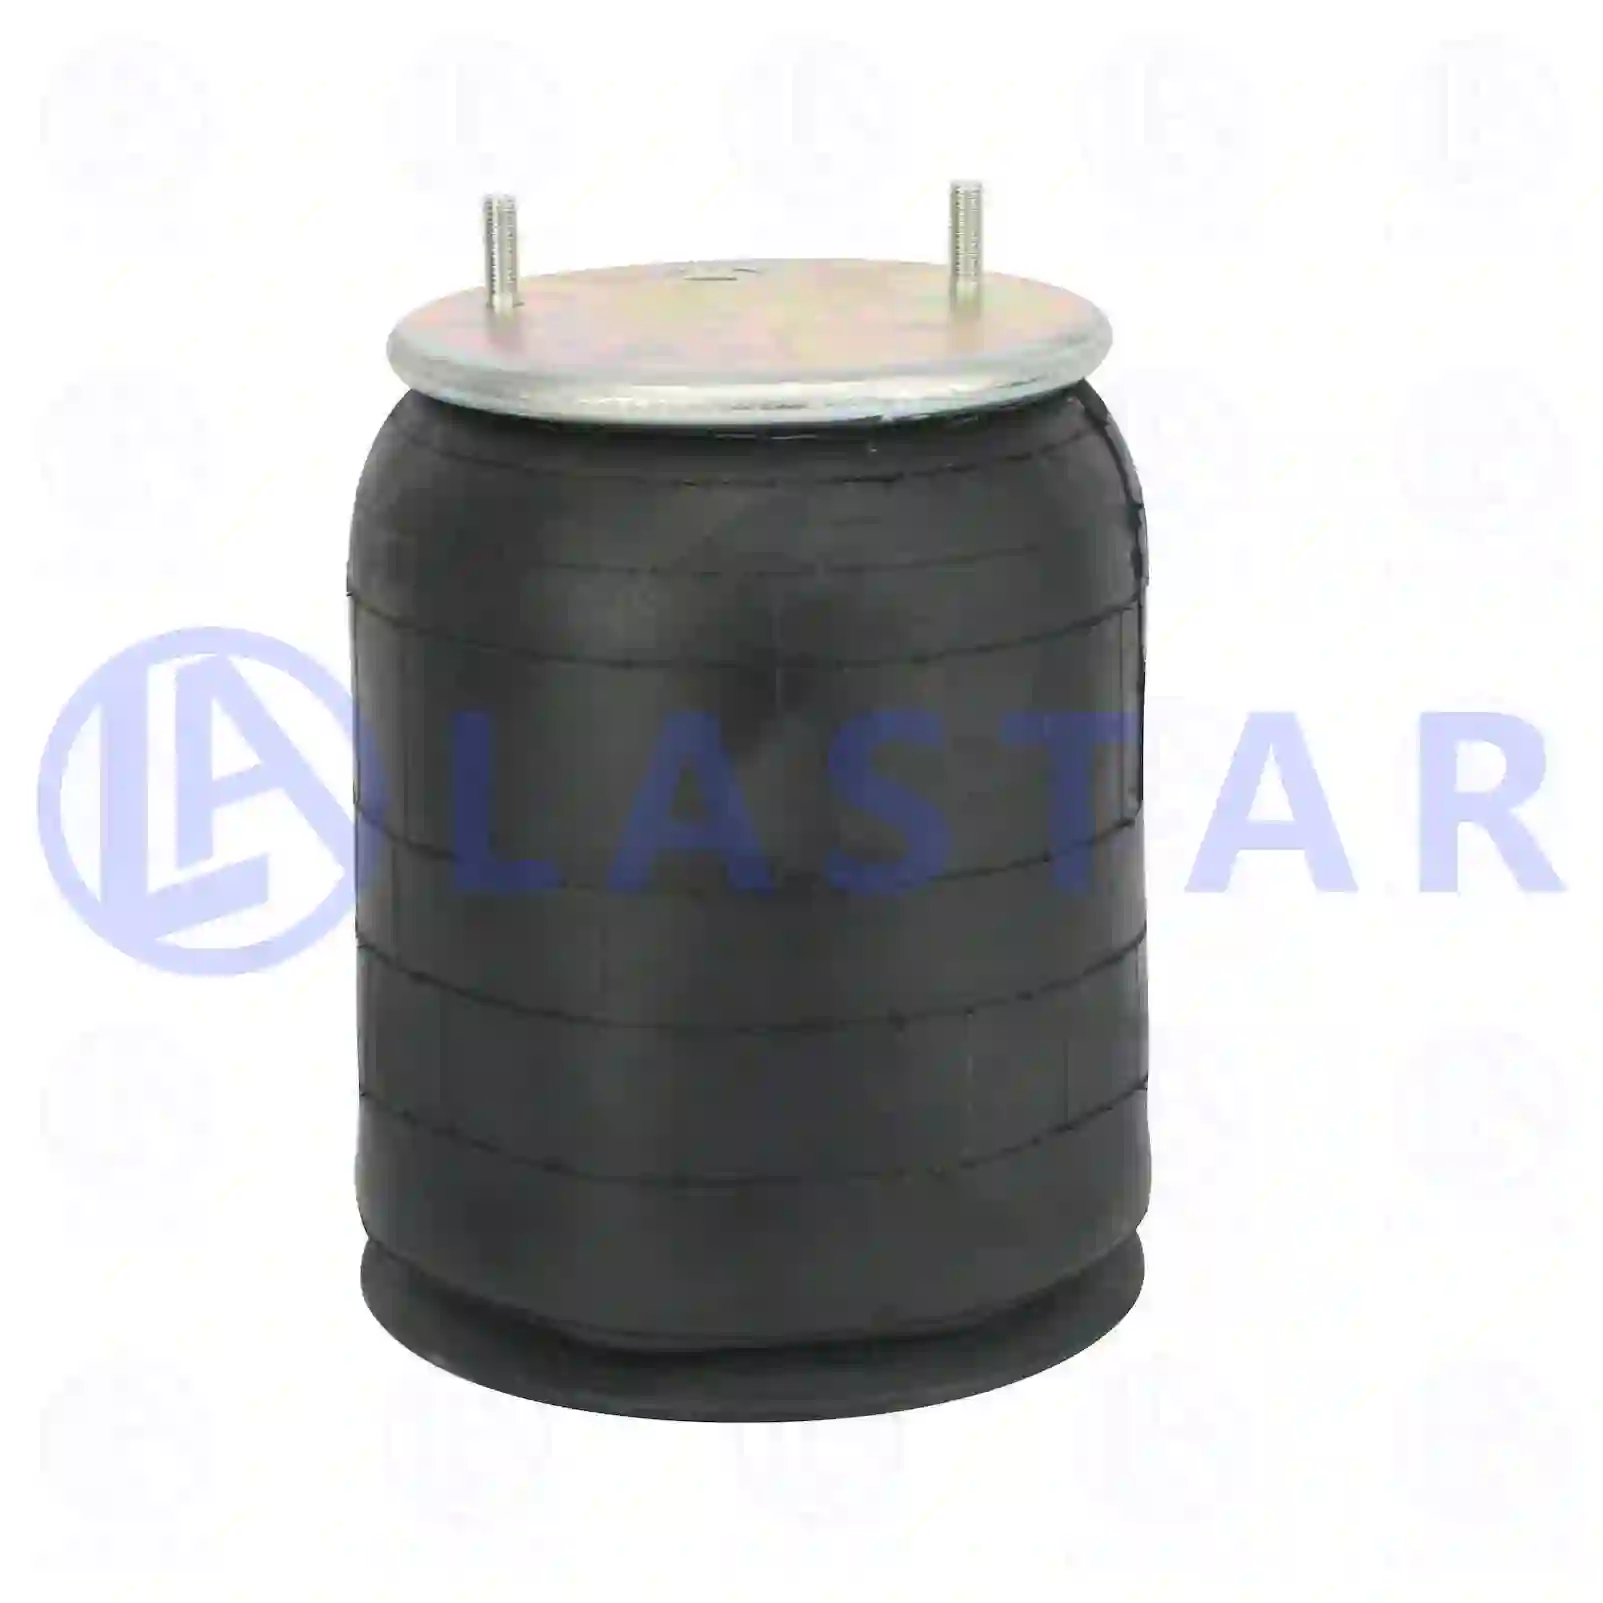 Air spring, with plastic piston, 77727149, 9463280901, 9463281201, , , ||  77727149 Lastar Spare Part | Truck Spare Parts, Auotomotive Spare Parts Air spring, with plastic piston, 77727149, 9463280901, 9463281201, , , ||  77727149 Lastar Spare Part | Truck Spare Parts, Auotomotive Spare Parts